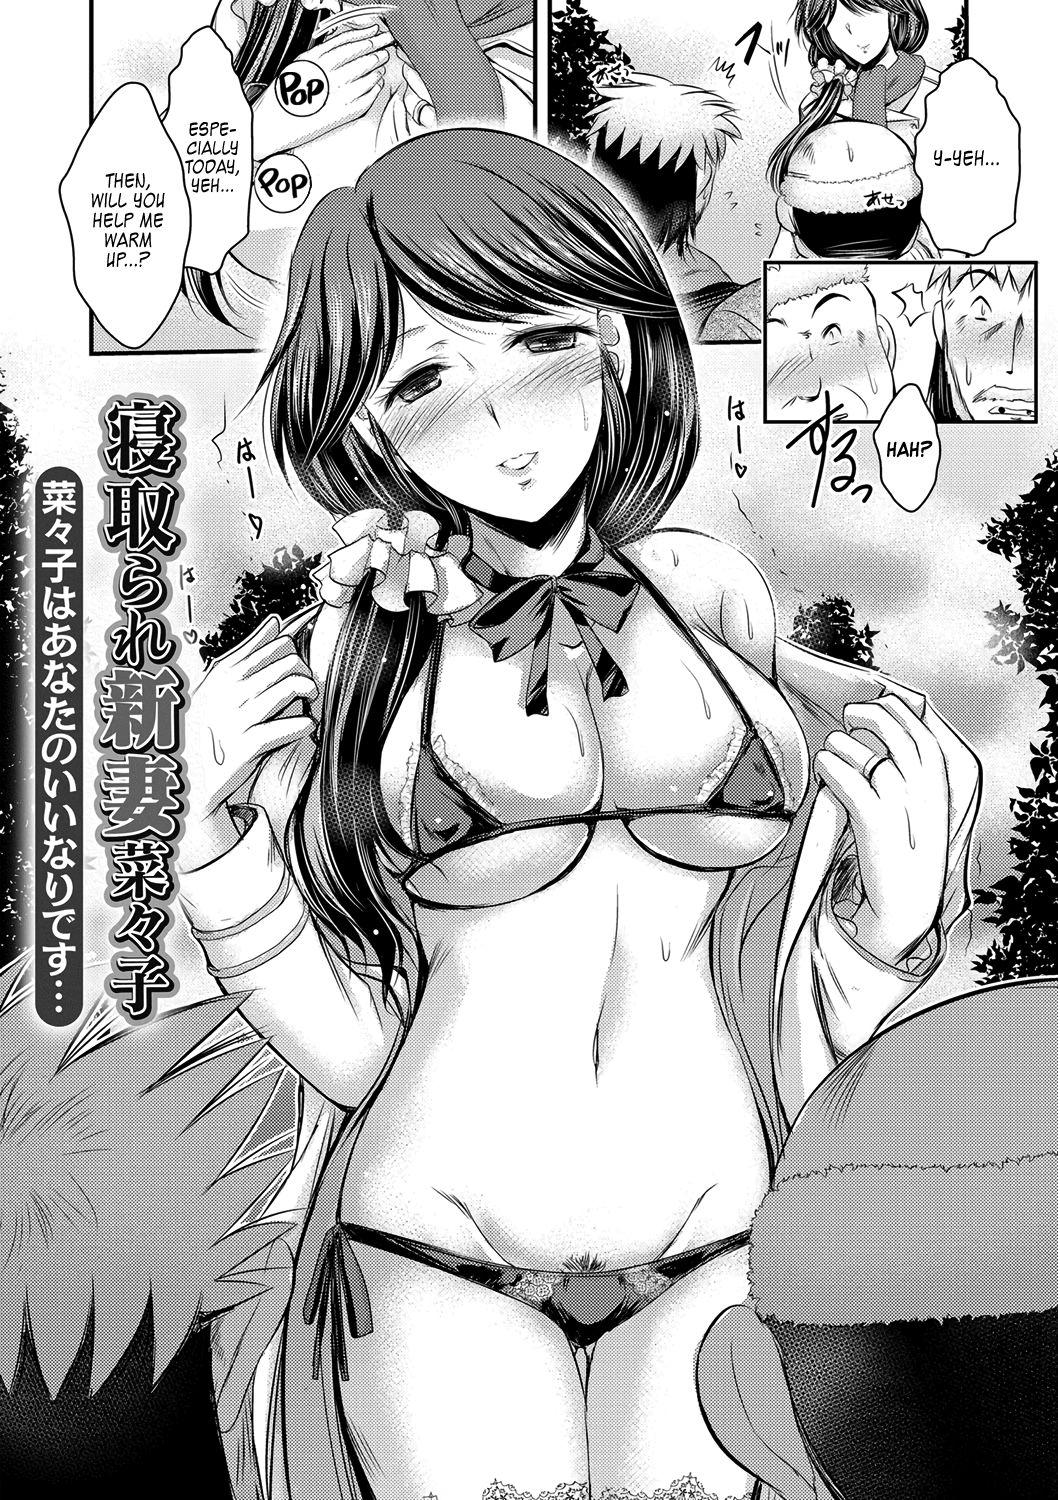 Gaysex Kyouhaku Kannen Ch. 3 Special Locations - Page 2